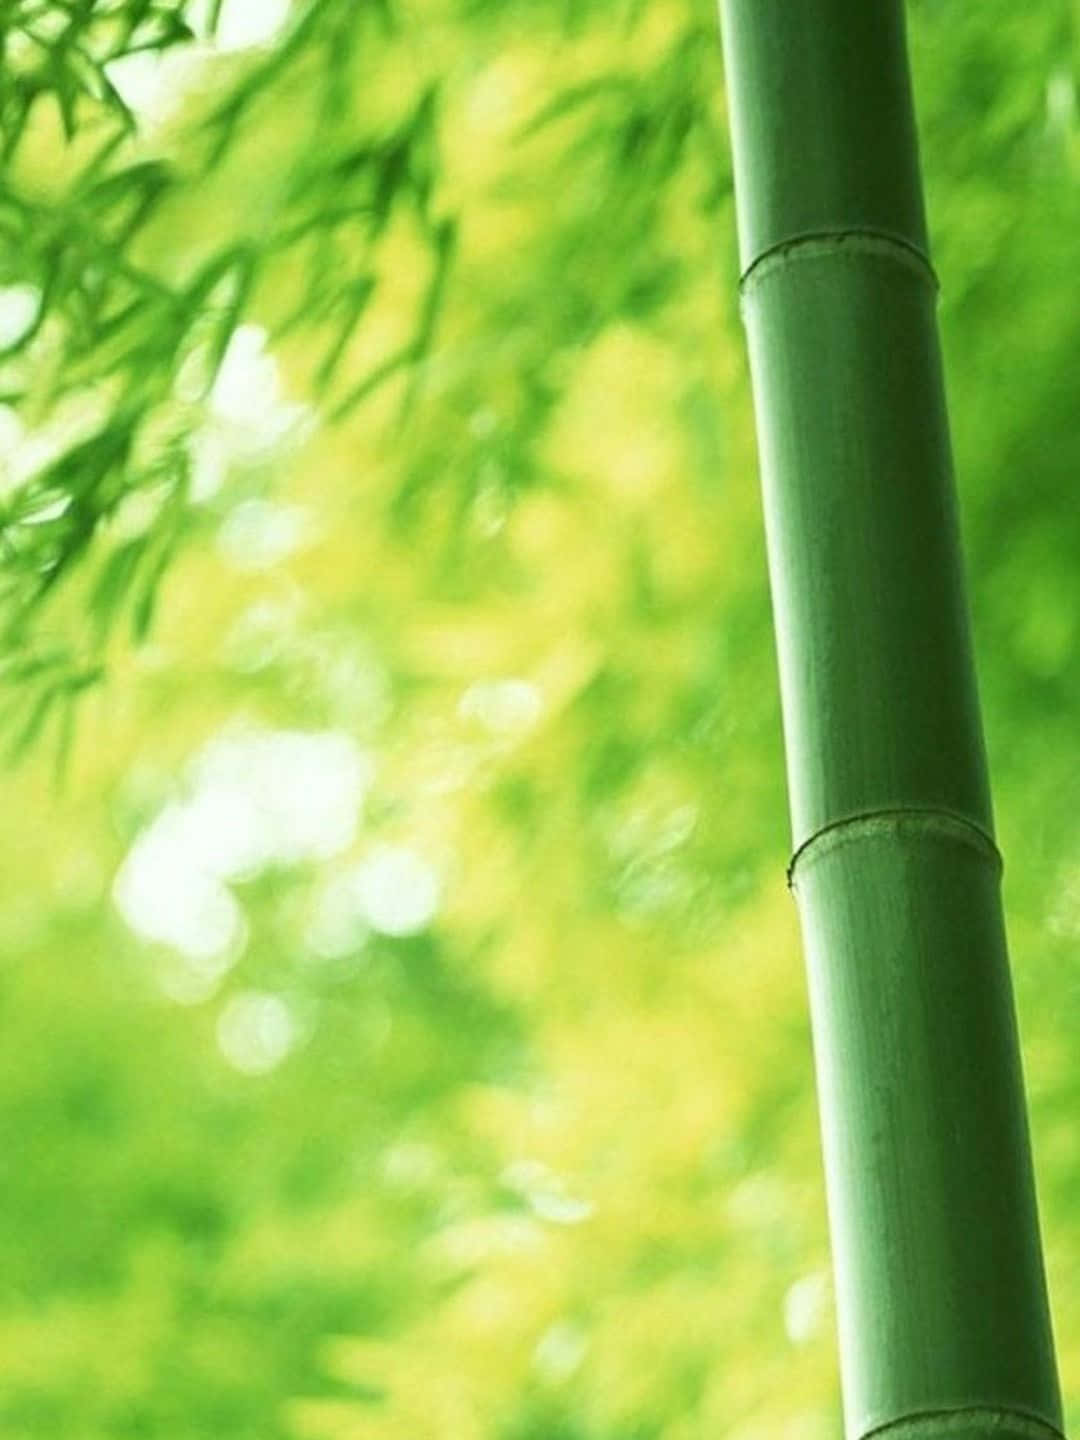 1440p Bamboo Background Tree With A Blurry Backdrop